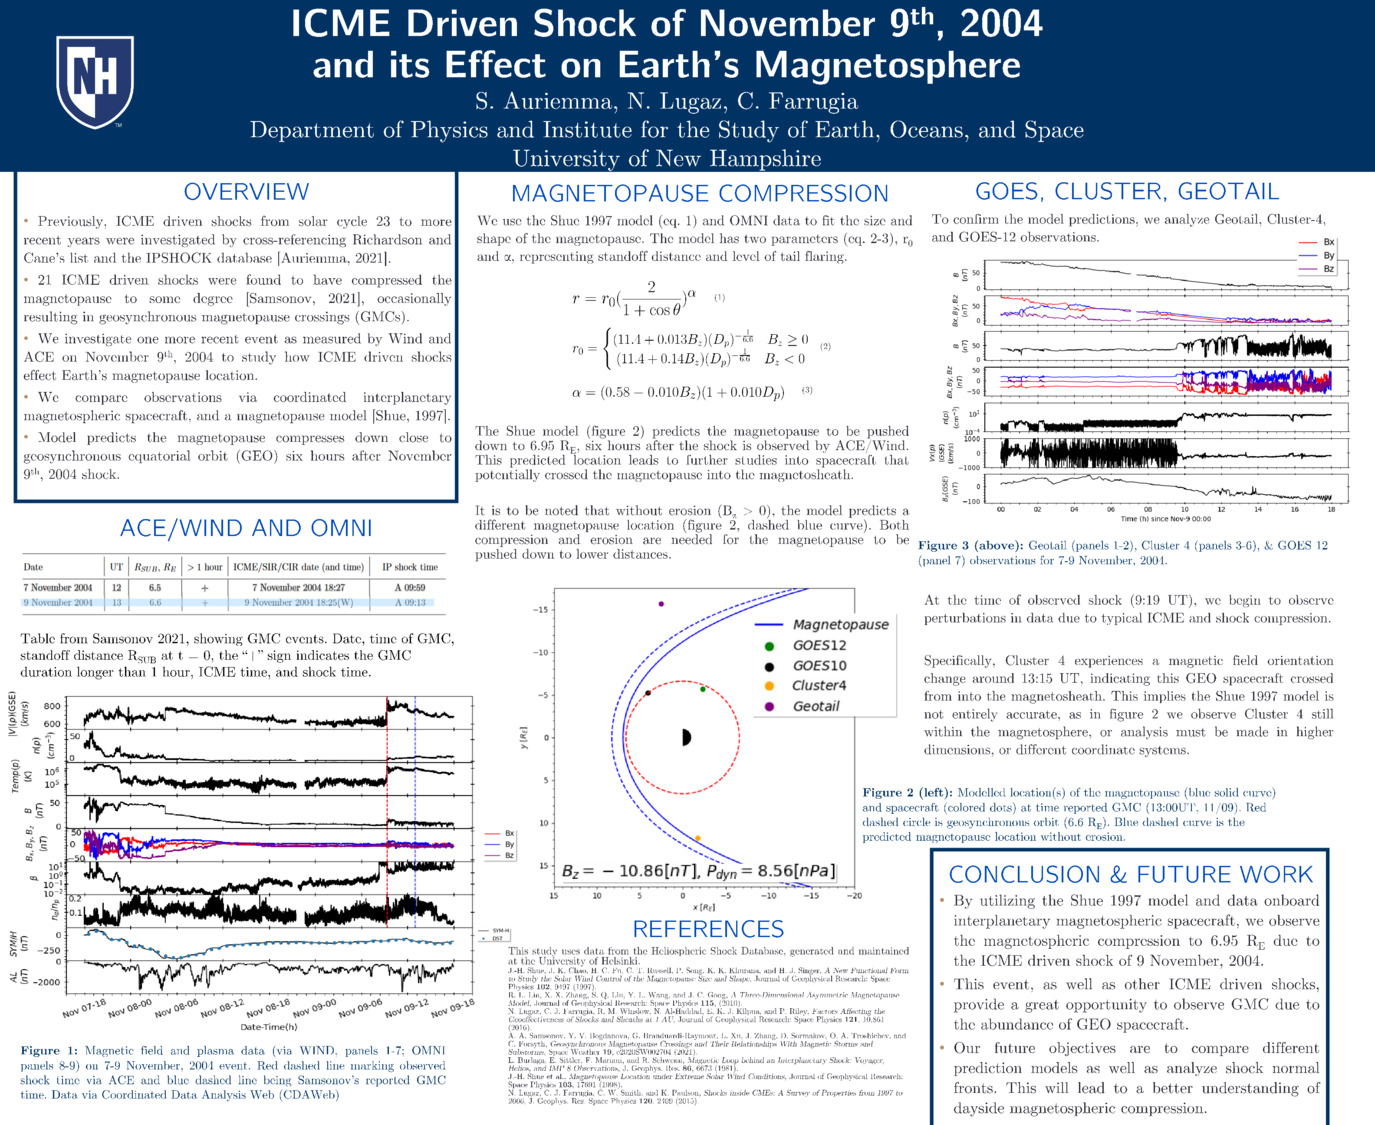 Icme Driven Shock Of November 9th, 2004 And Its Effect On Earth’S Magnetosphere by sja1037